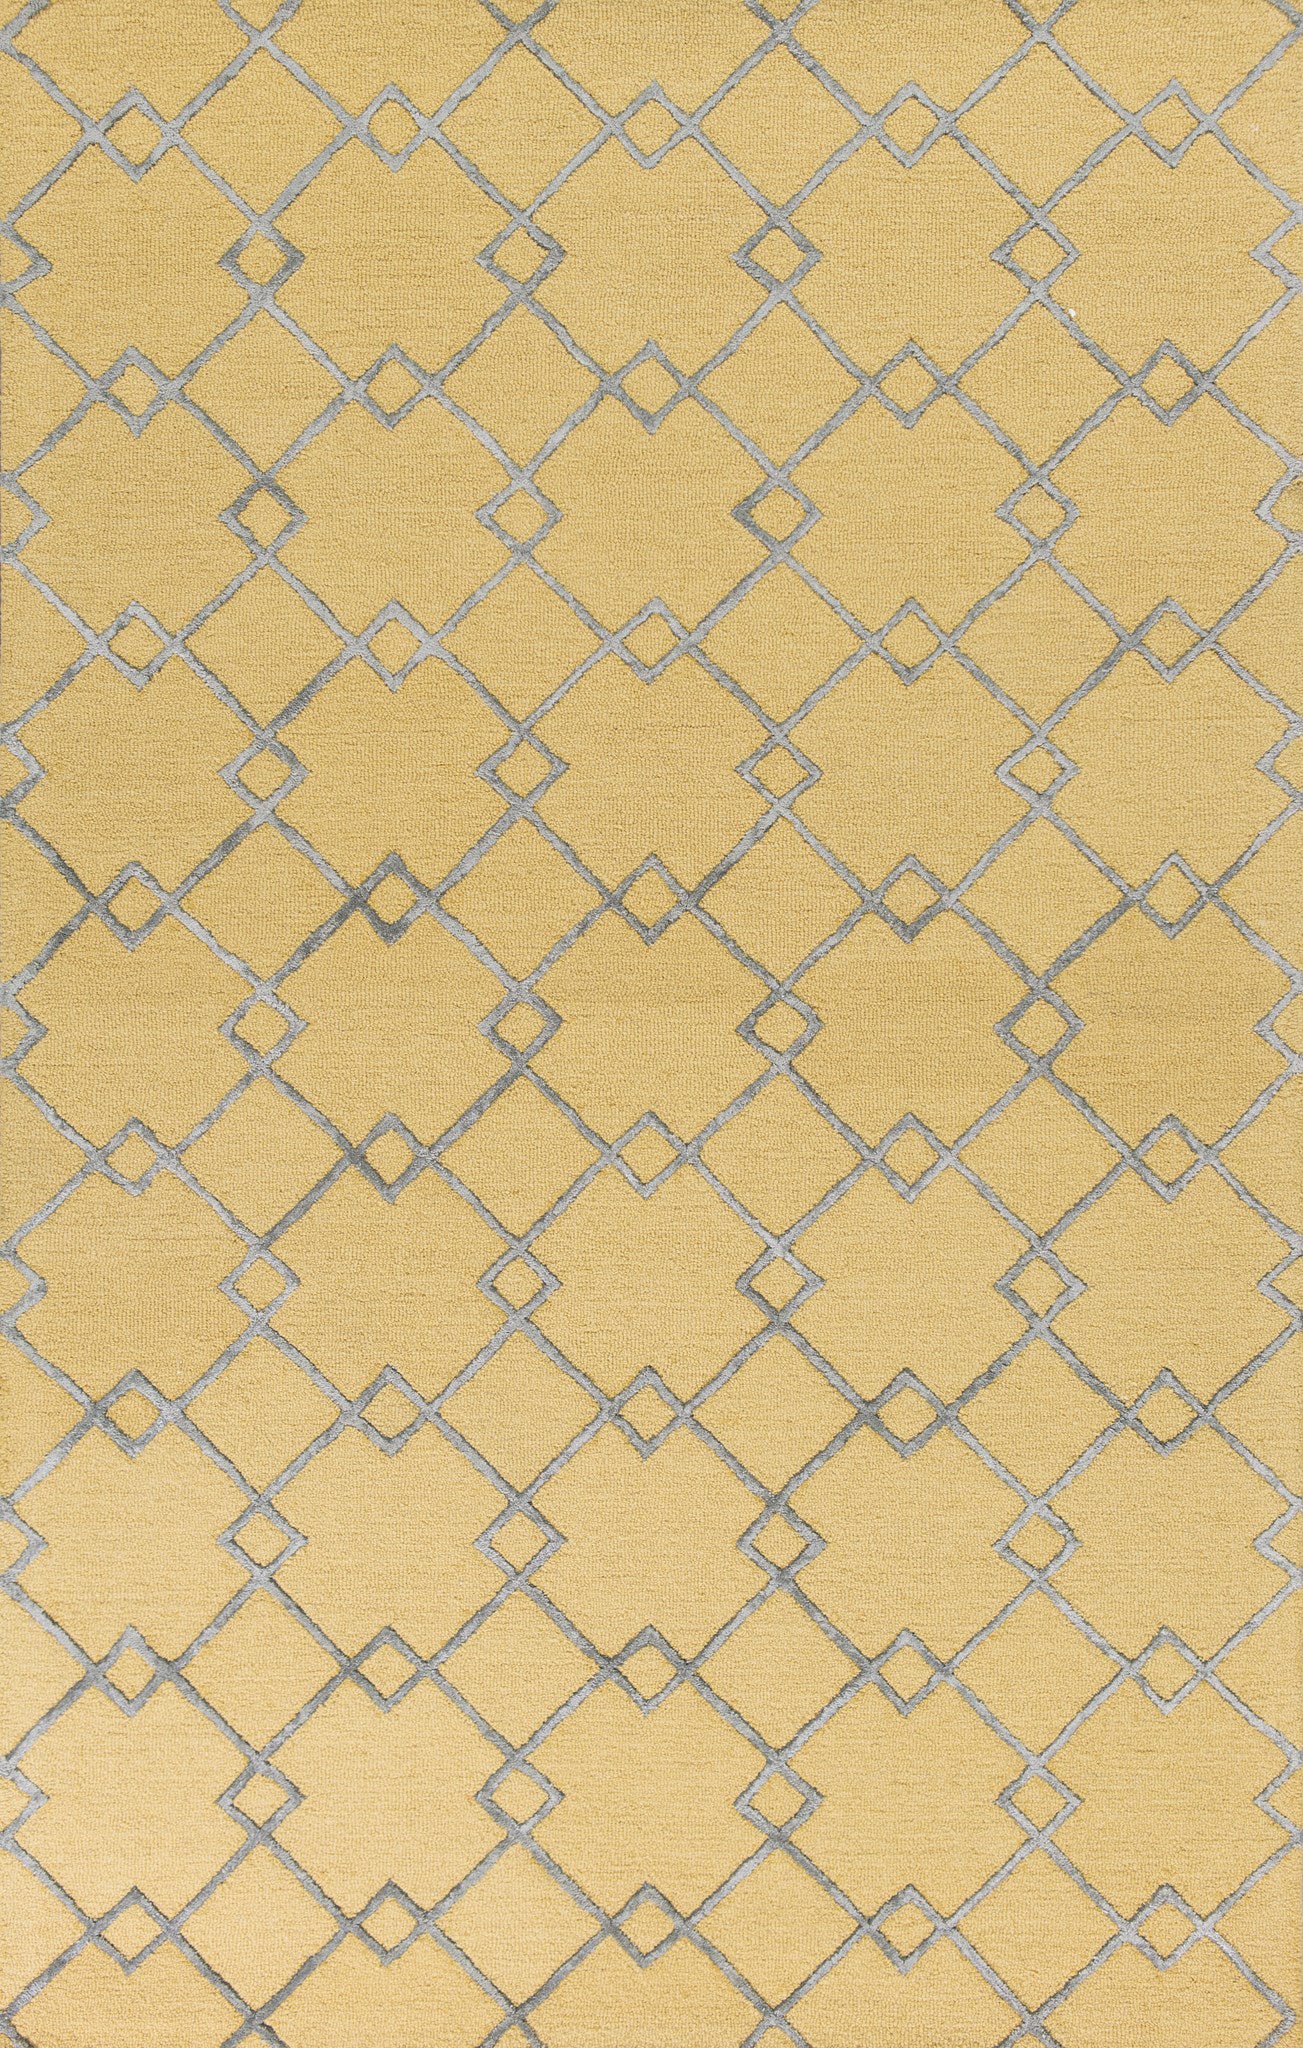 KAS Impressions 4613 Gold/Grey Courtyard Area Rug main image